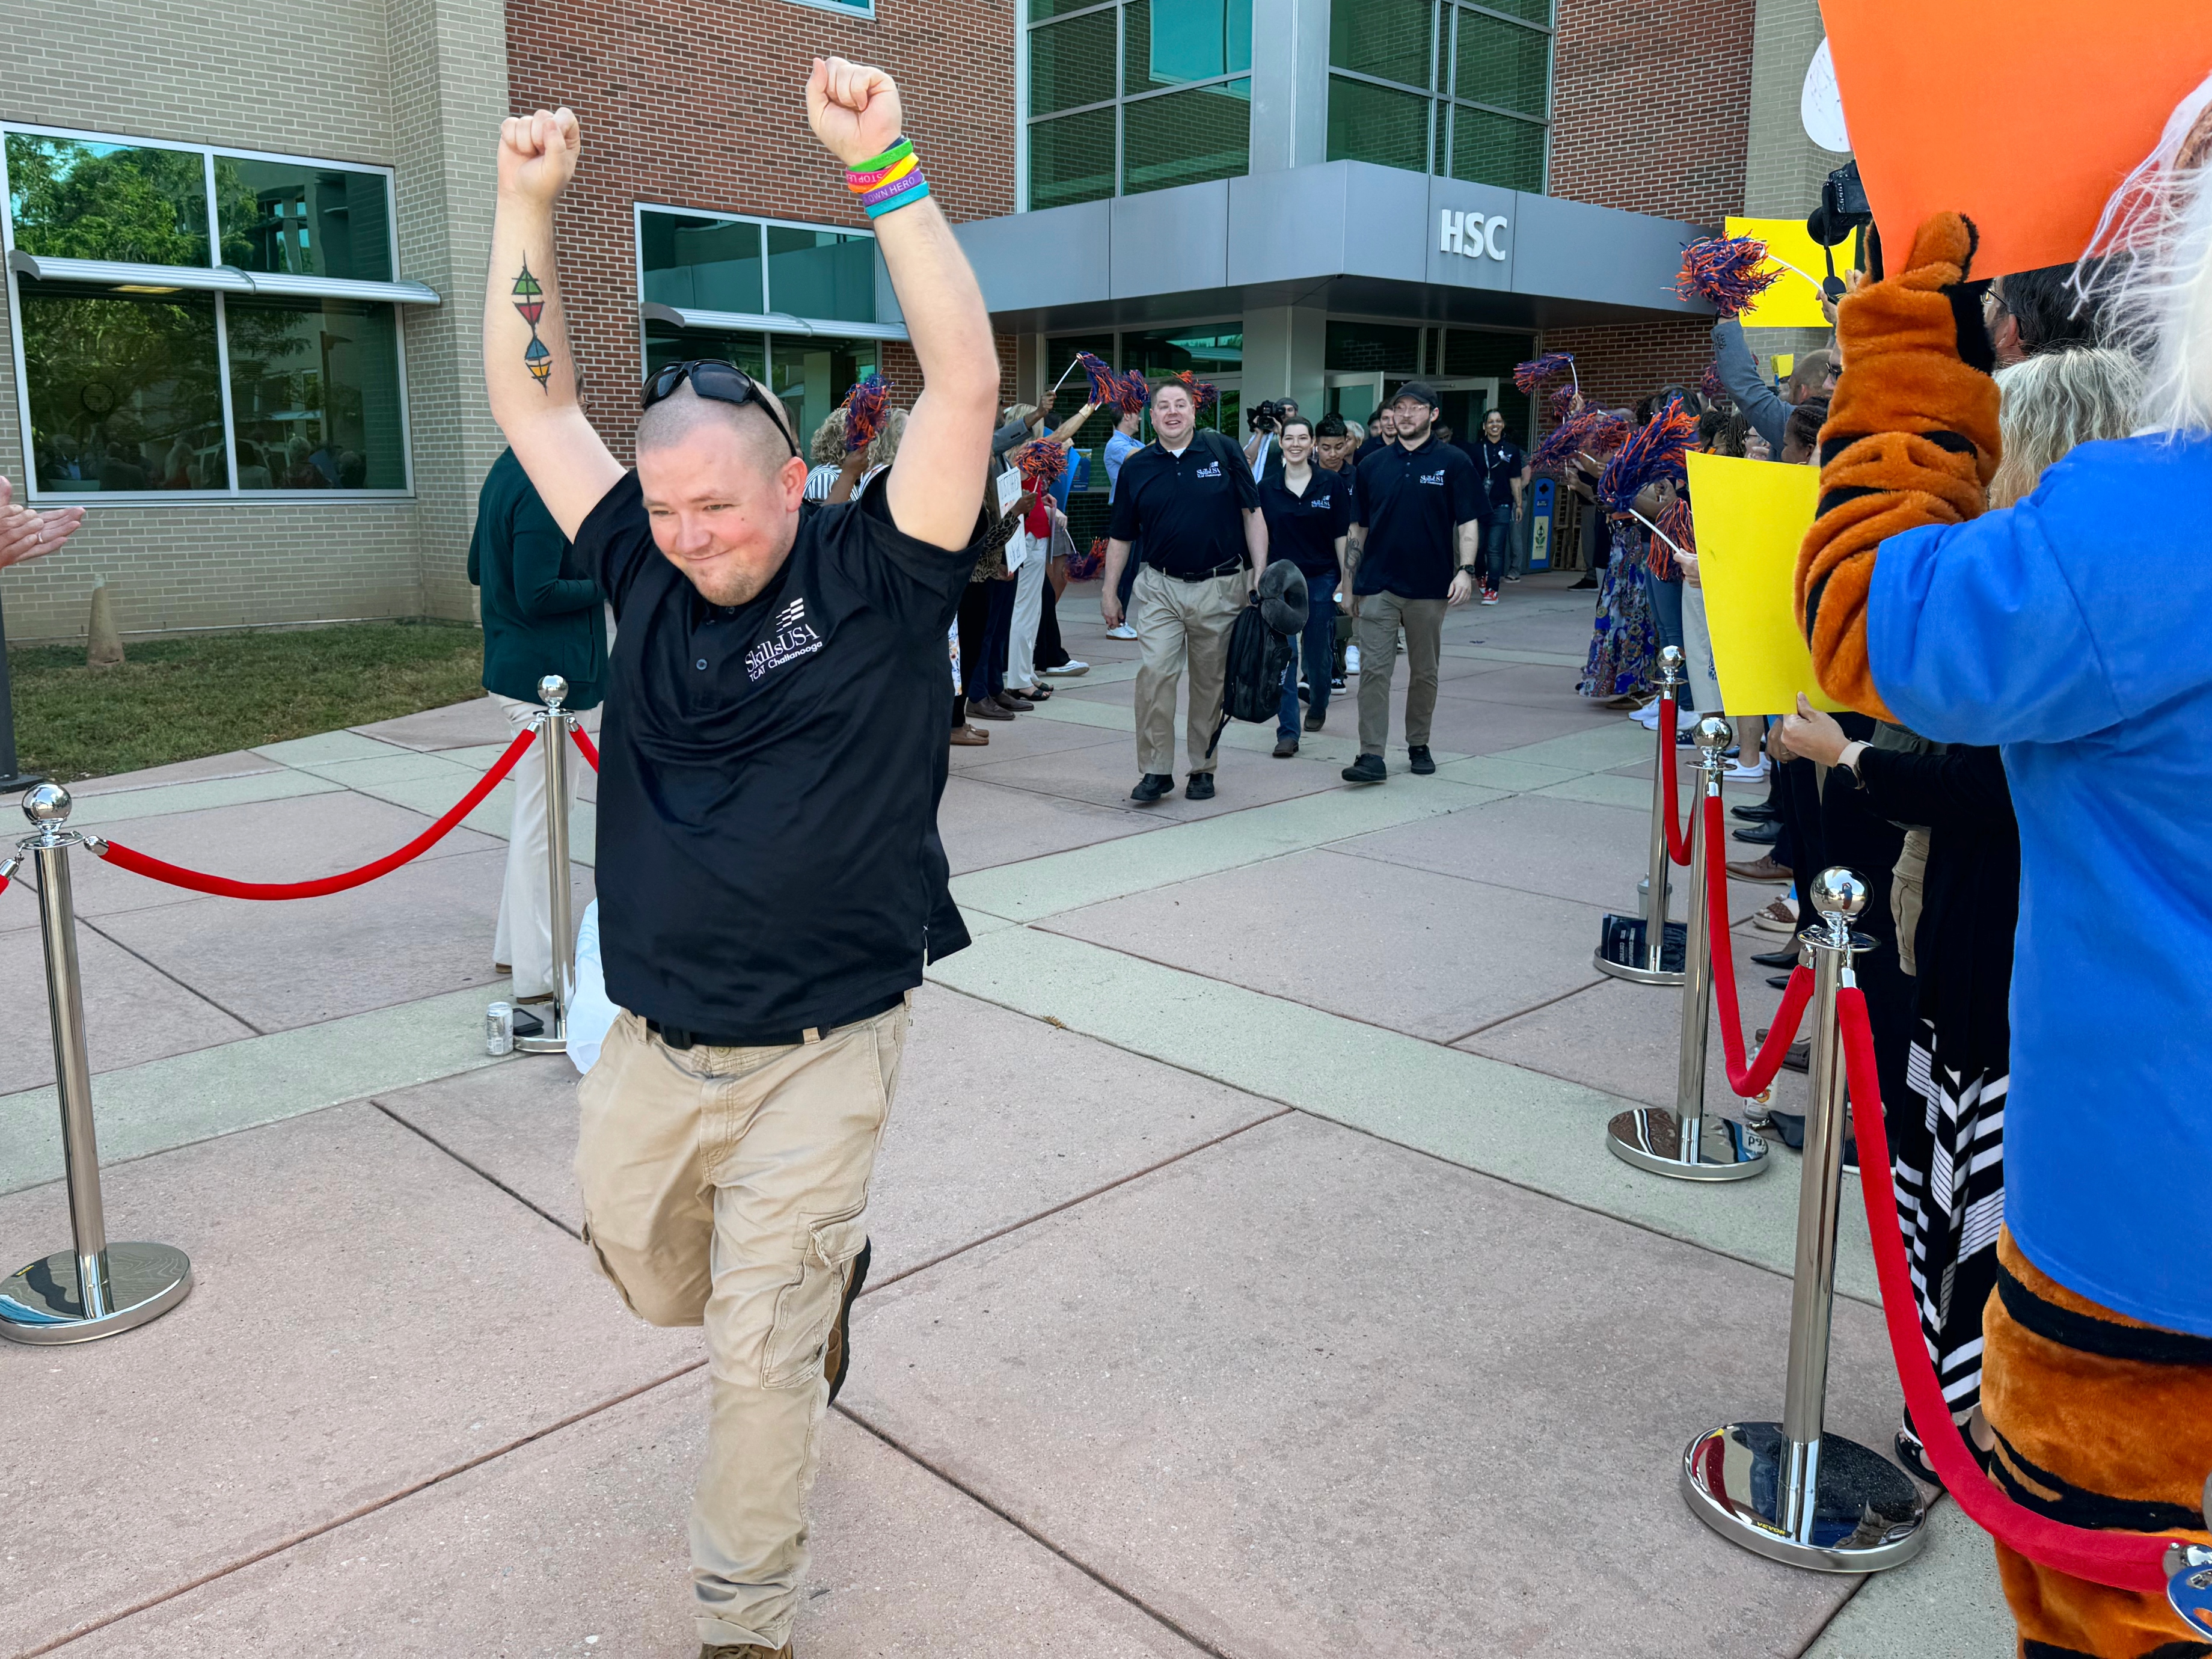 ChattState student John Jordan raises his hands in the air before boarding a bus to SkillsUSA's national competition in Atlanta.